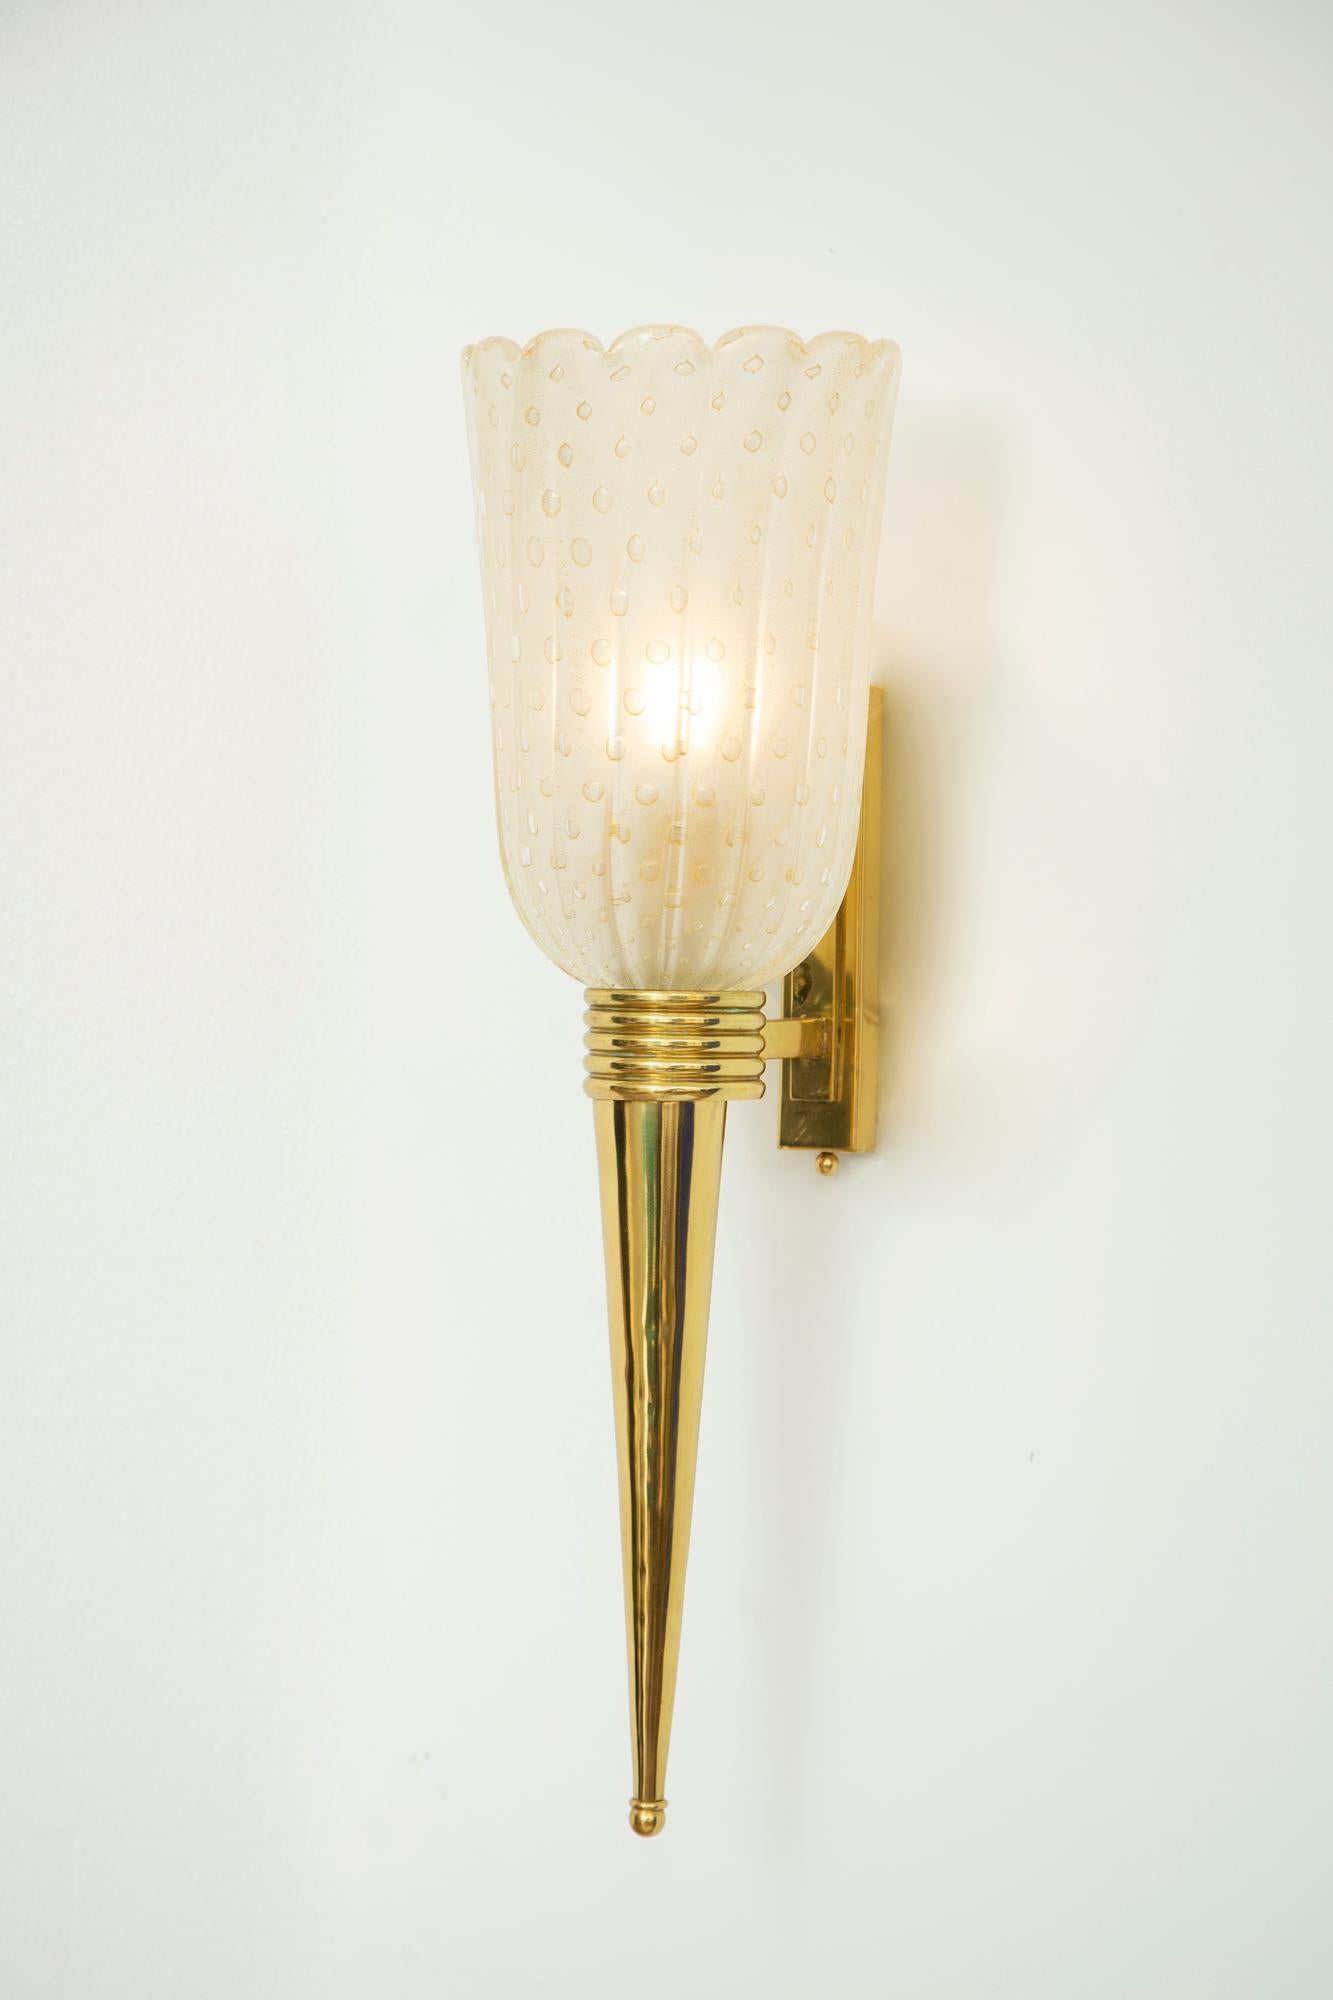 Pair of torchiere brass & murano glass wall sconces. Hand blown glass with gold flecking and encased bubbles and polished brass.
Single E26 socket size.
2 pairs available in stock.